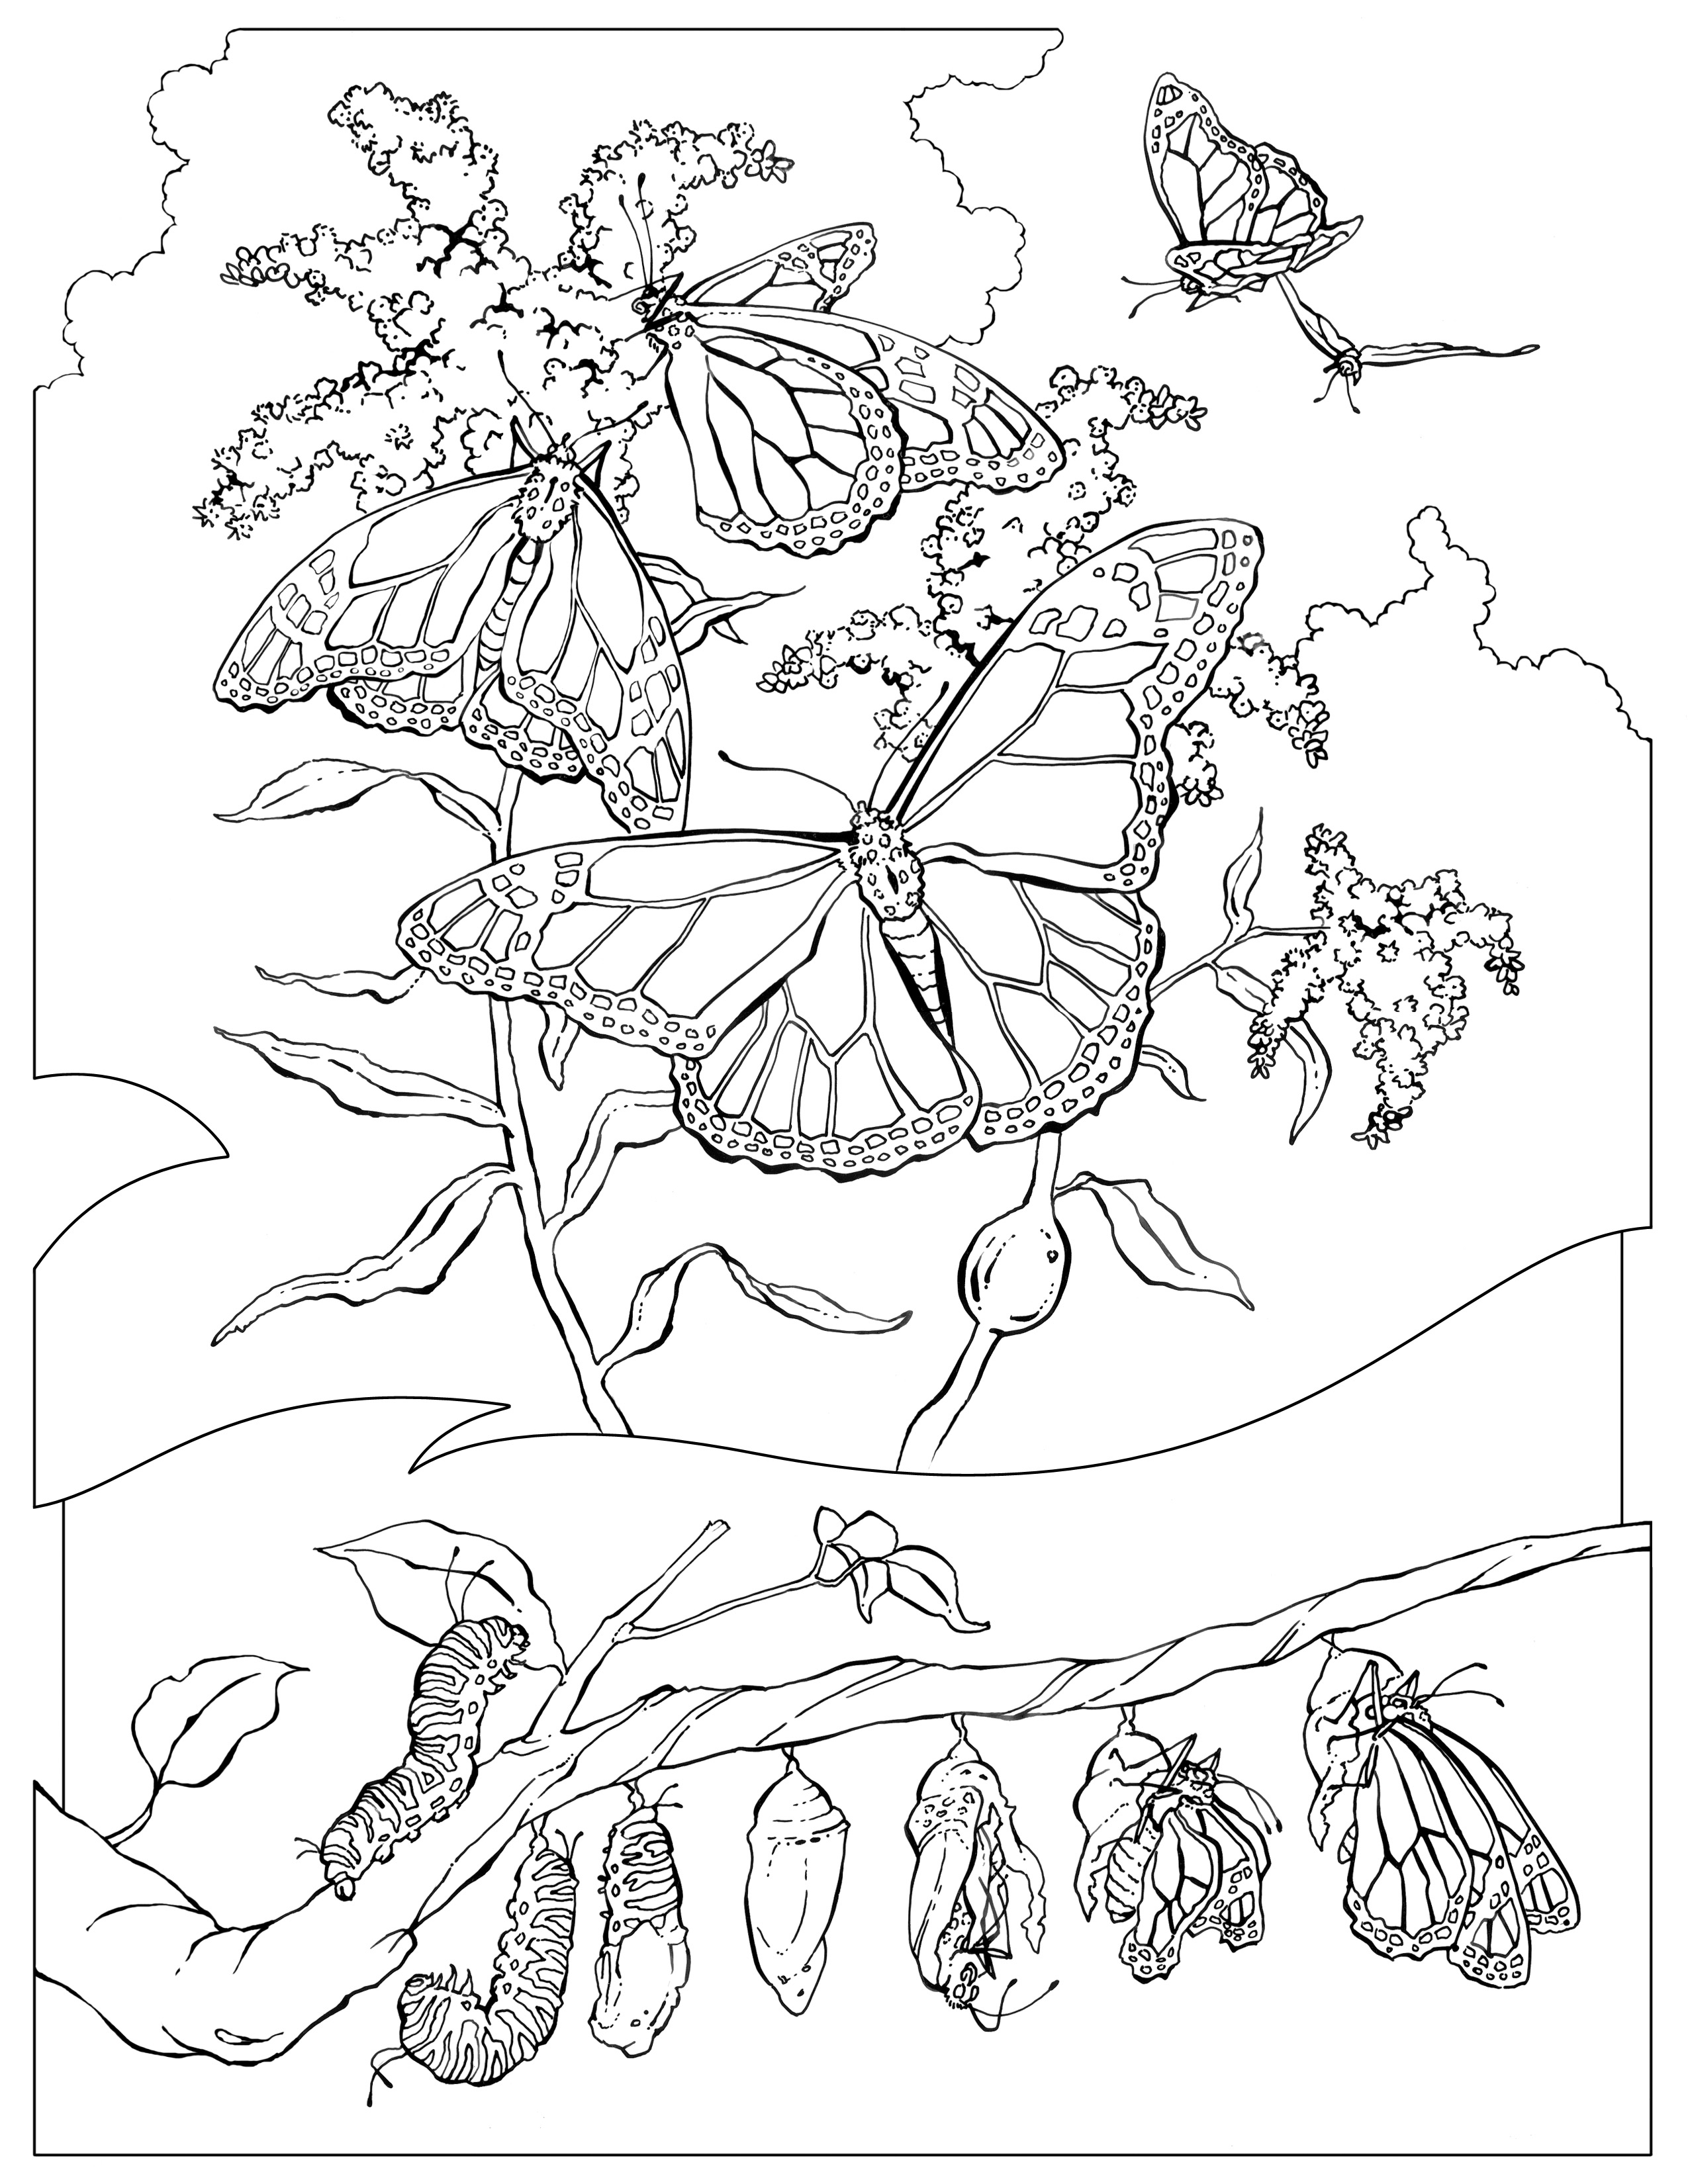 Monarch Butterfly Coloring Page Monarch Butterfly Coloring Pages Free